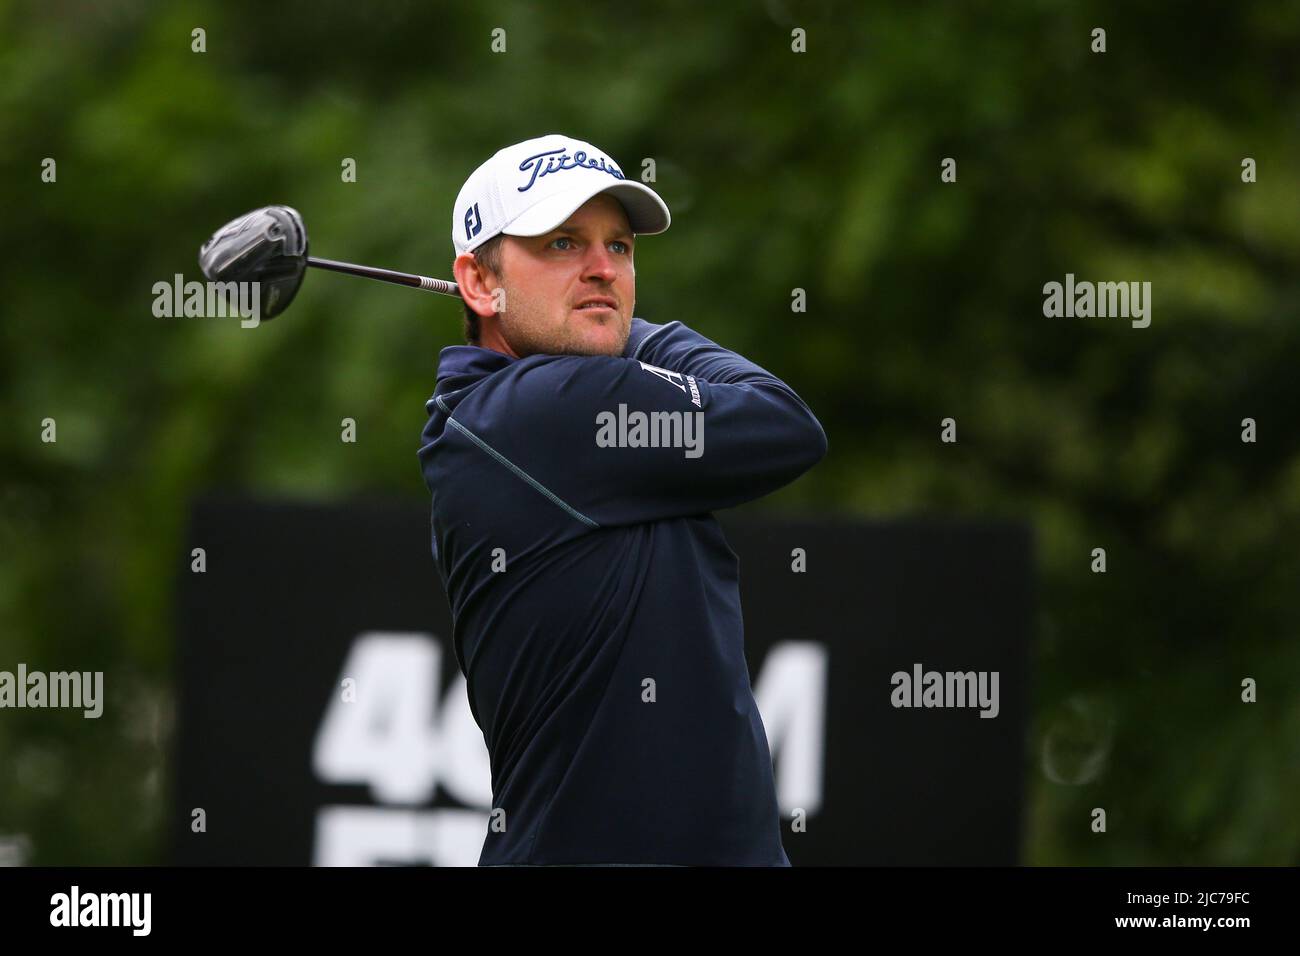 ST ALBANS, ENGLAND - JUNE 09: Bernd Wiesberger of Austria tees off on the 4th hole during day one of the LIV Golf Invitational at The Centurion Club on June 9, 2022 in St Albans, England. (MB Media) Stock Photo